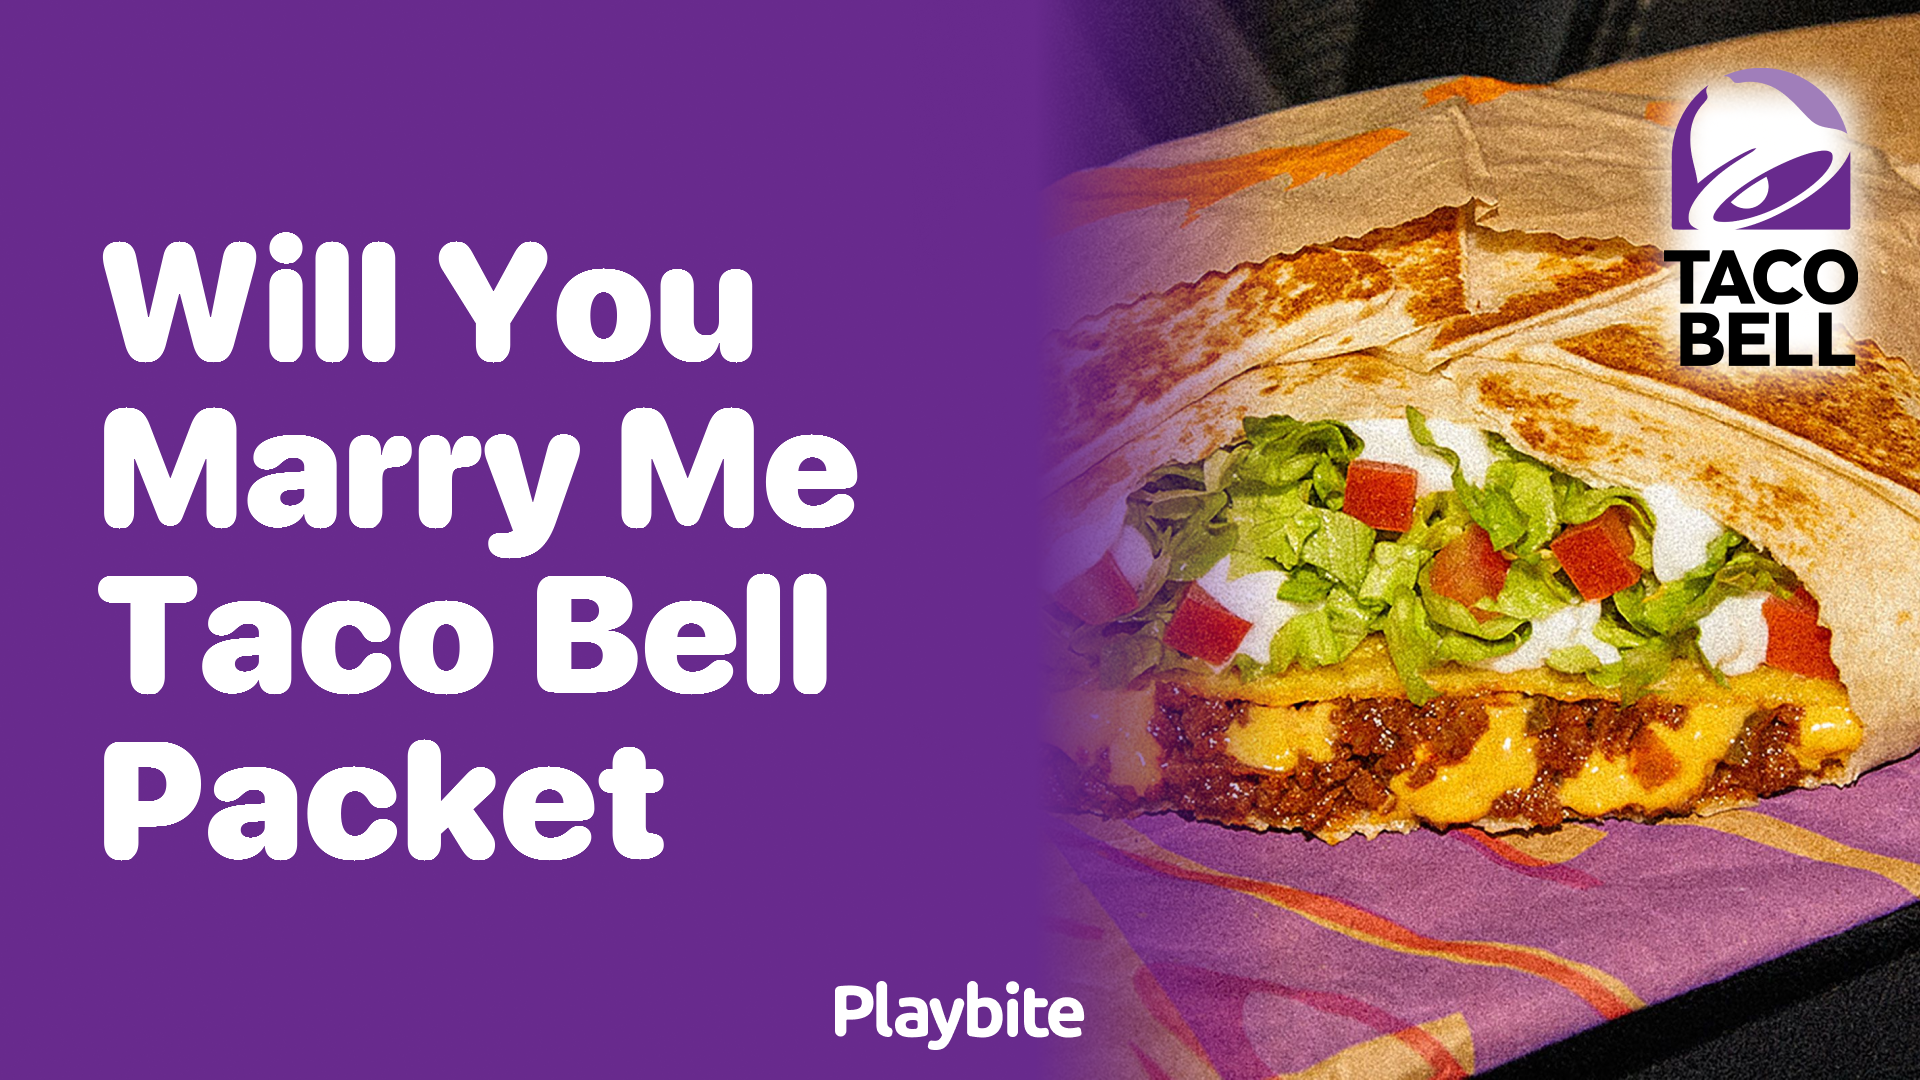 Will You Marry Me, Taco Bell Packet?